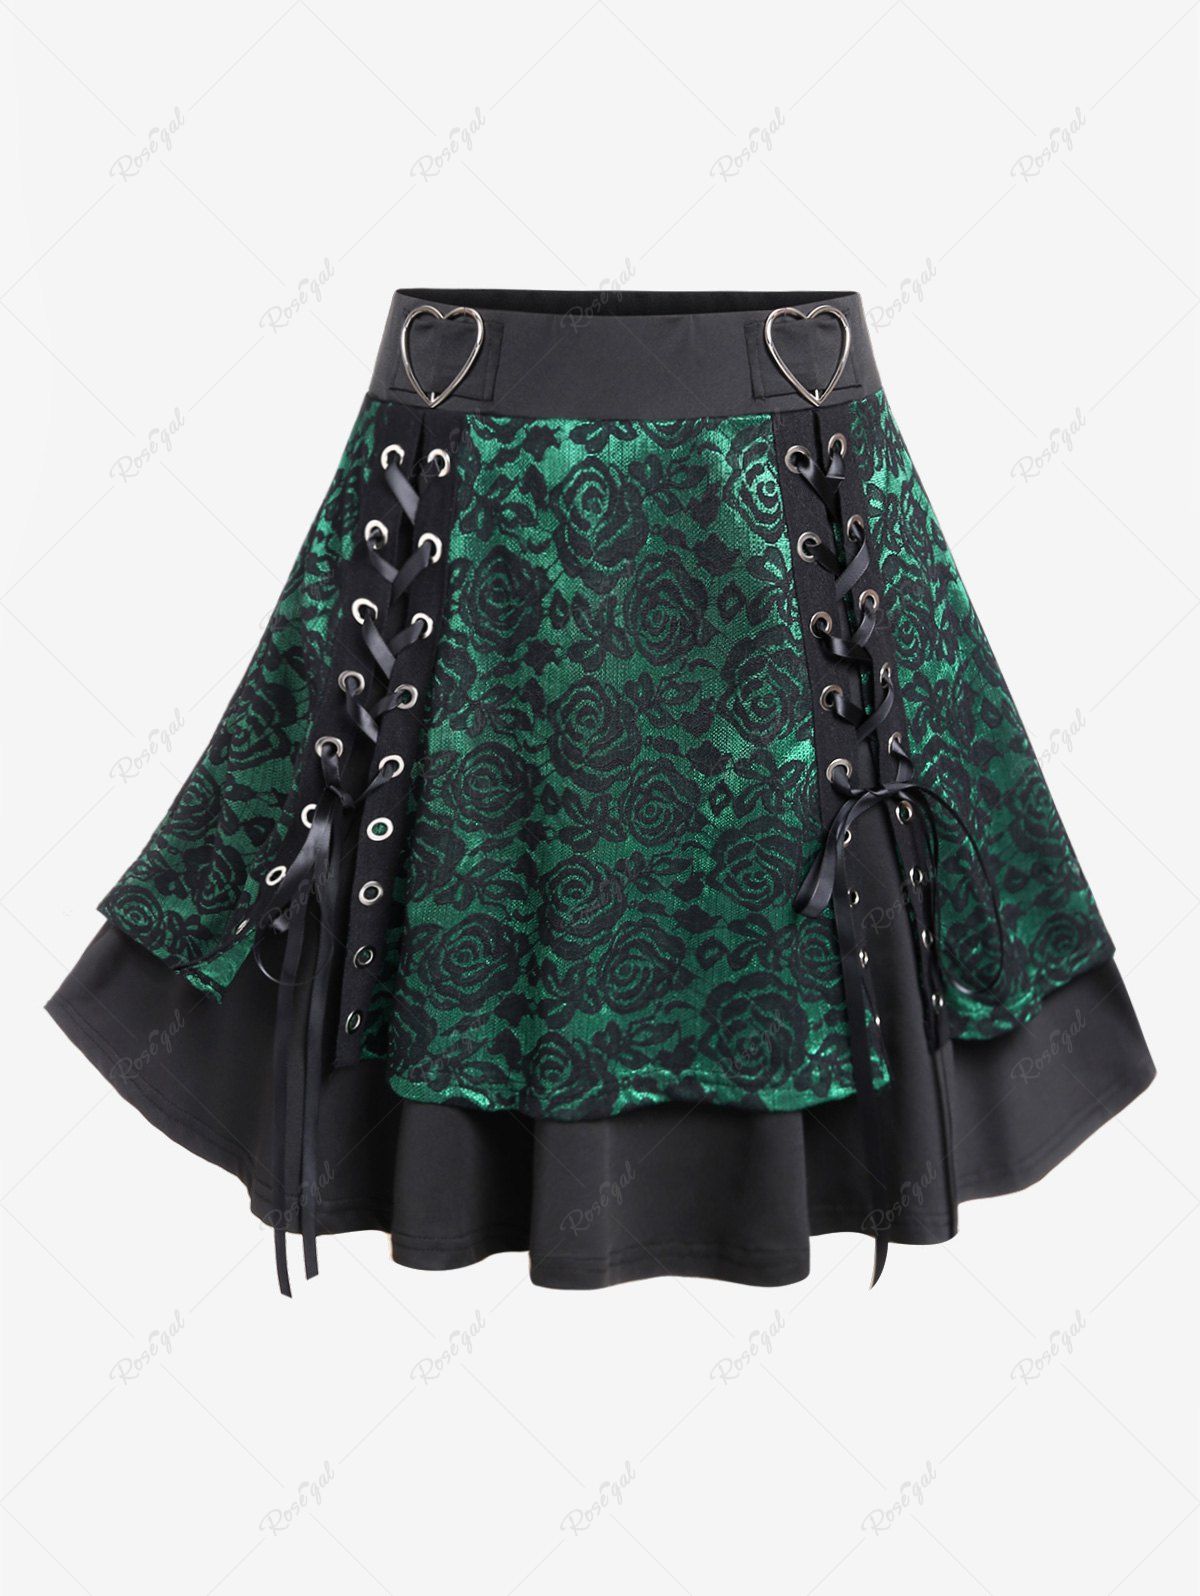 Discount Plus Size Heart Buckles Lace Up Floral Lace Layered Skirt  